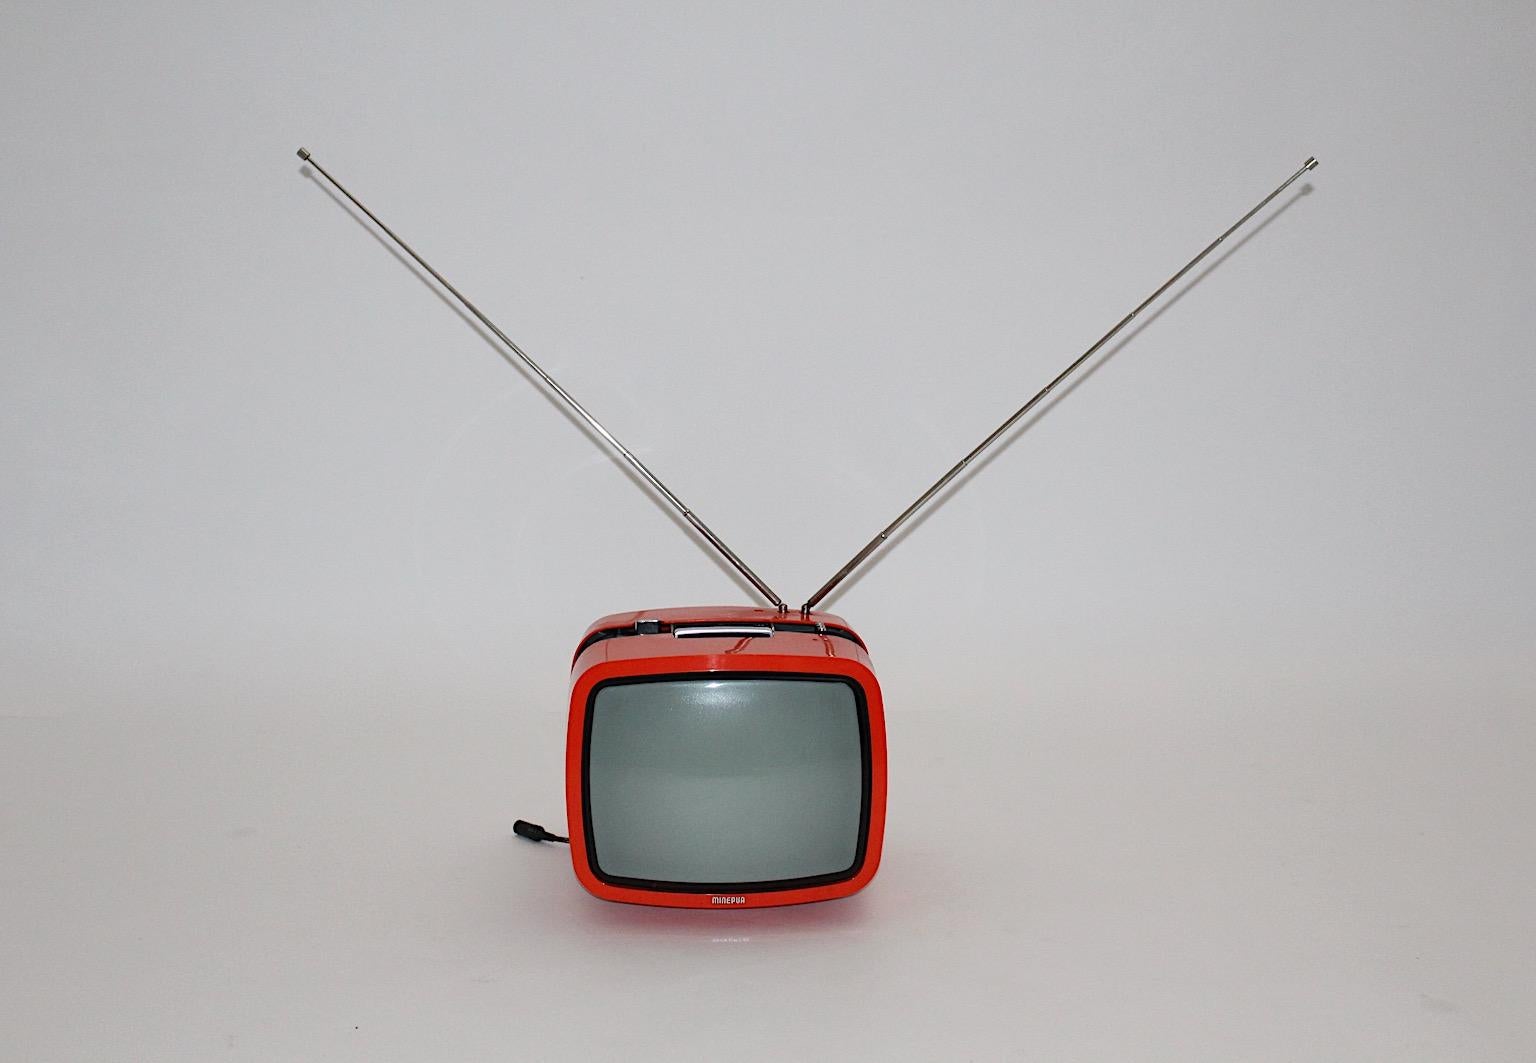 Space Age orange vintage television from plastic model Ikaro by Minerva, 1970s, Austria.
This portable television with an orange plastic casing by Minerva, Austria, was made for the Italian and Swiss market in the 1970s.
The casing is in very good